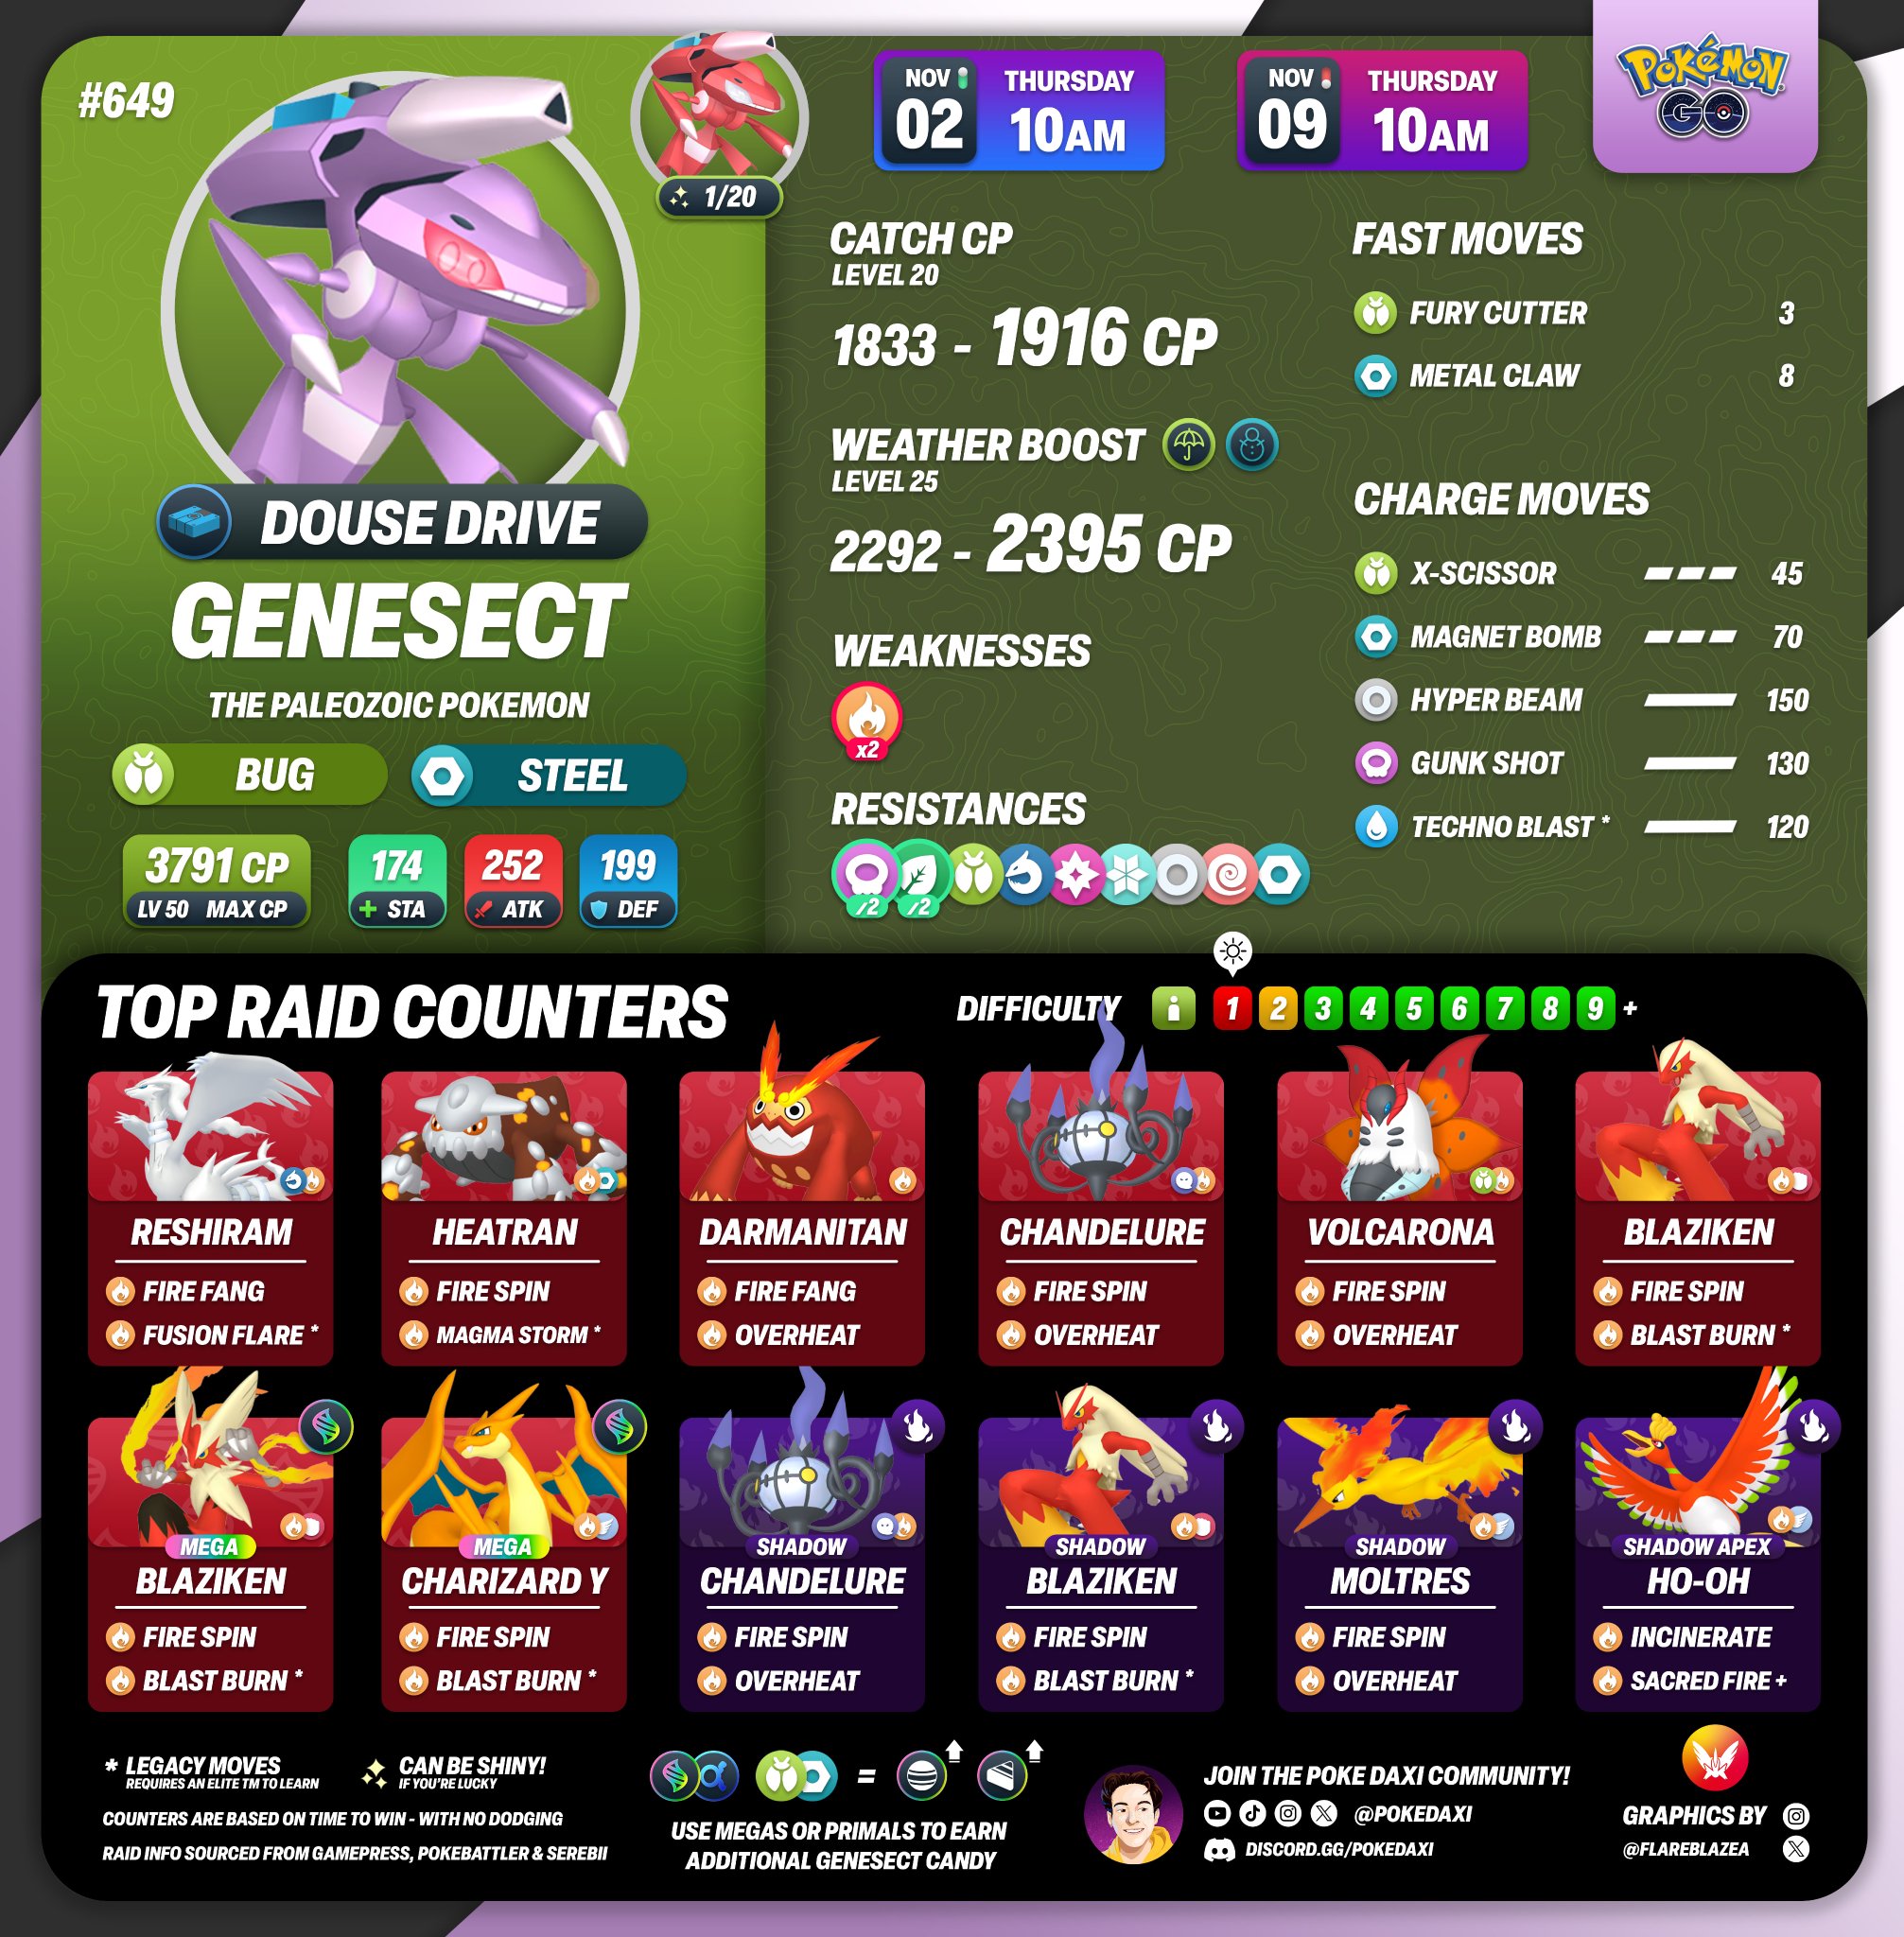 Pokemon Go Genesect Raid Guide: Best Counters, Weaknesses and Moveset - CNET